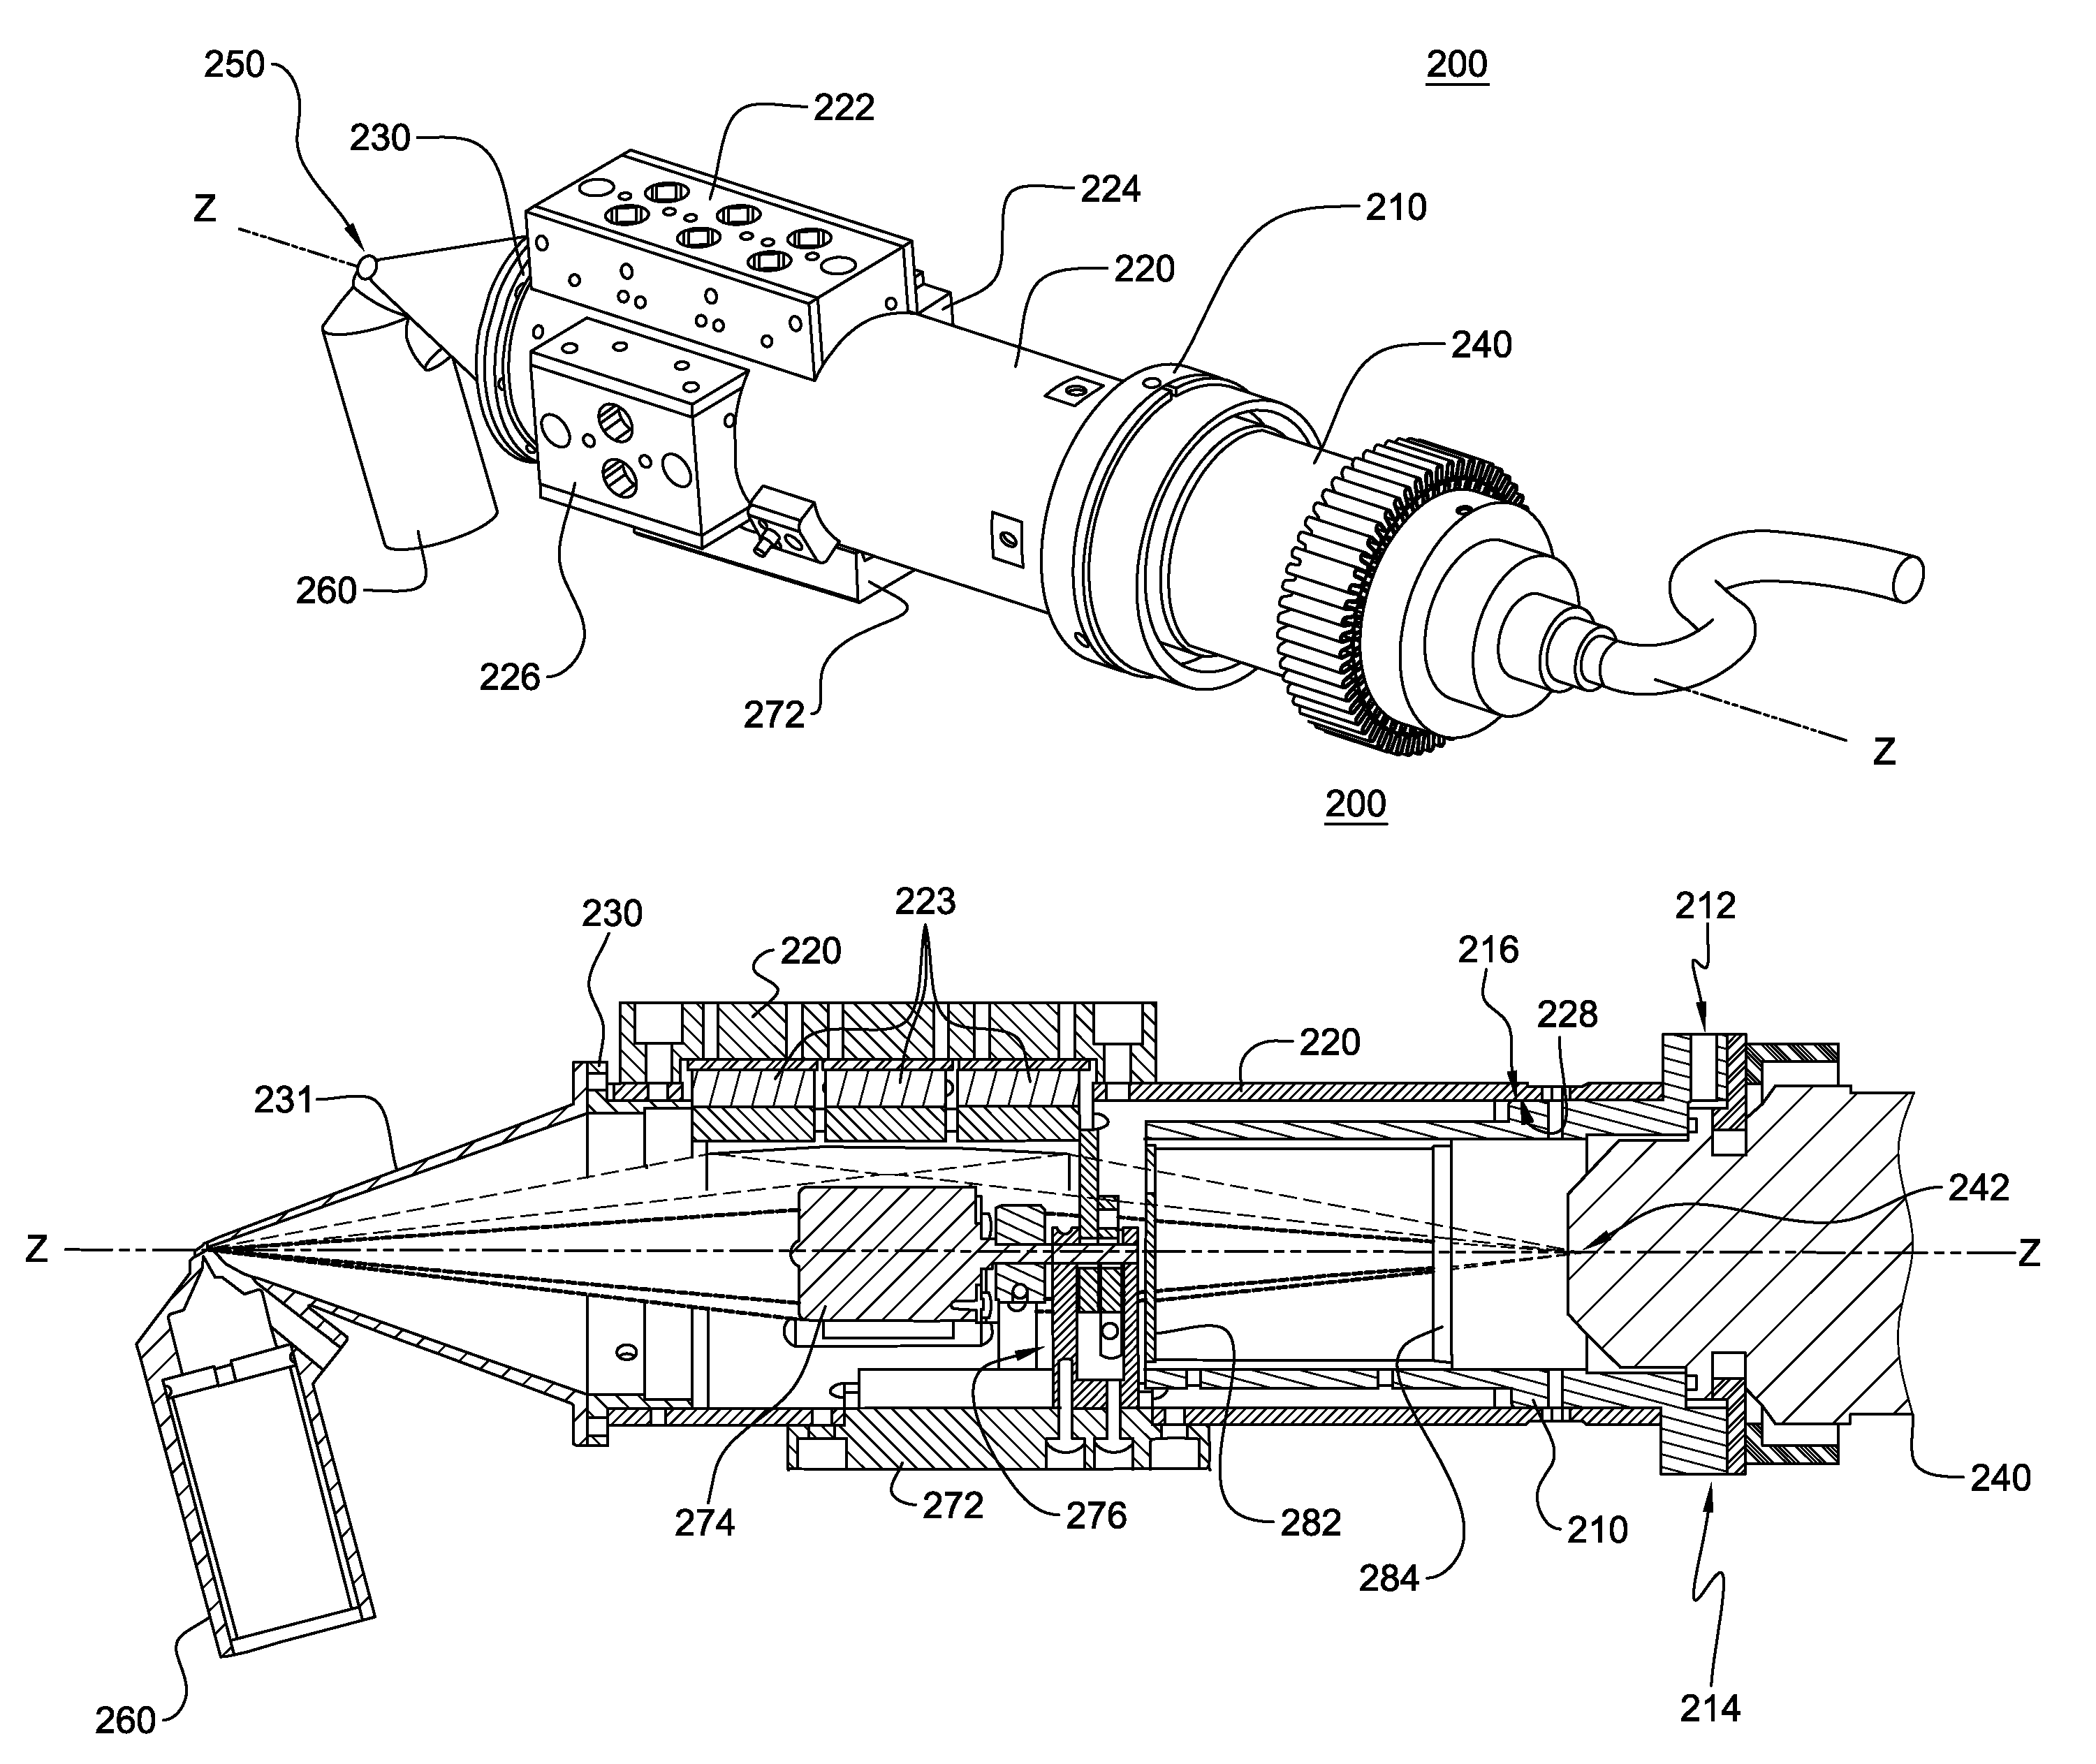 XRF system having multiple excitation energy bands in highly aligned package